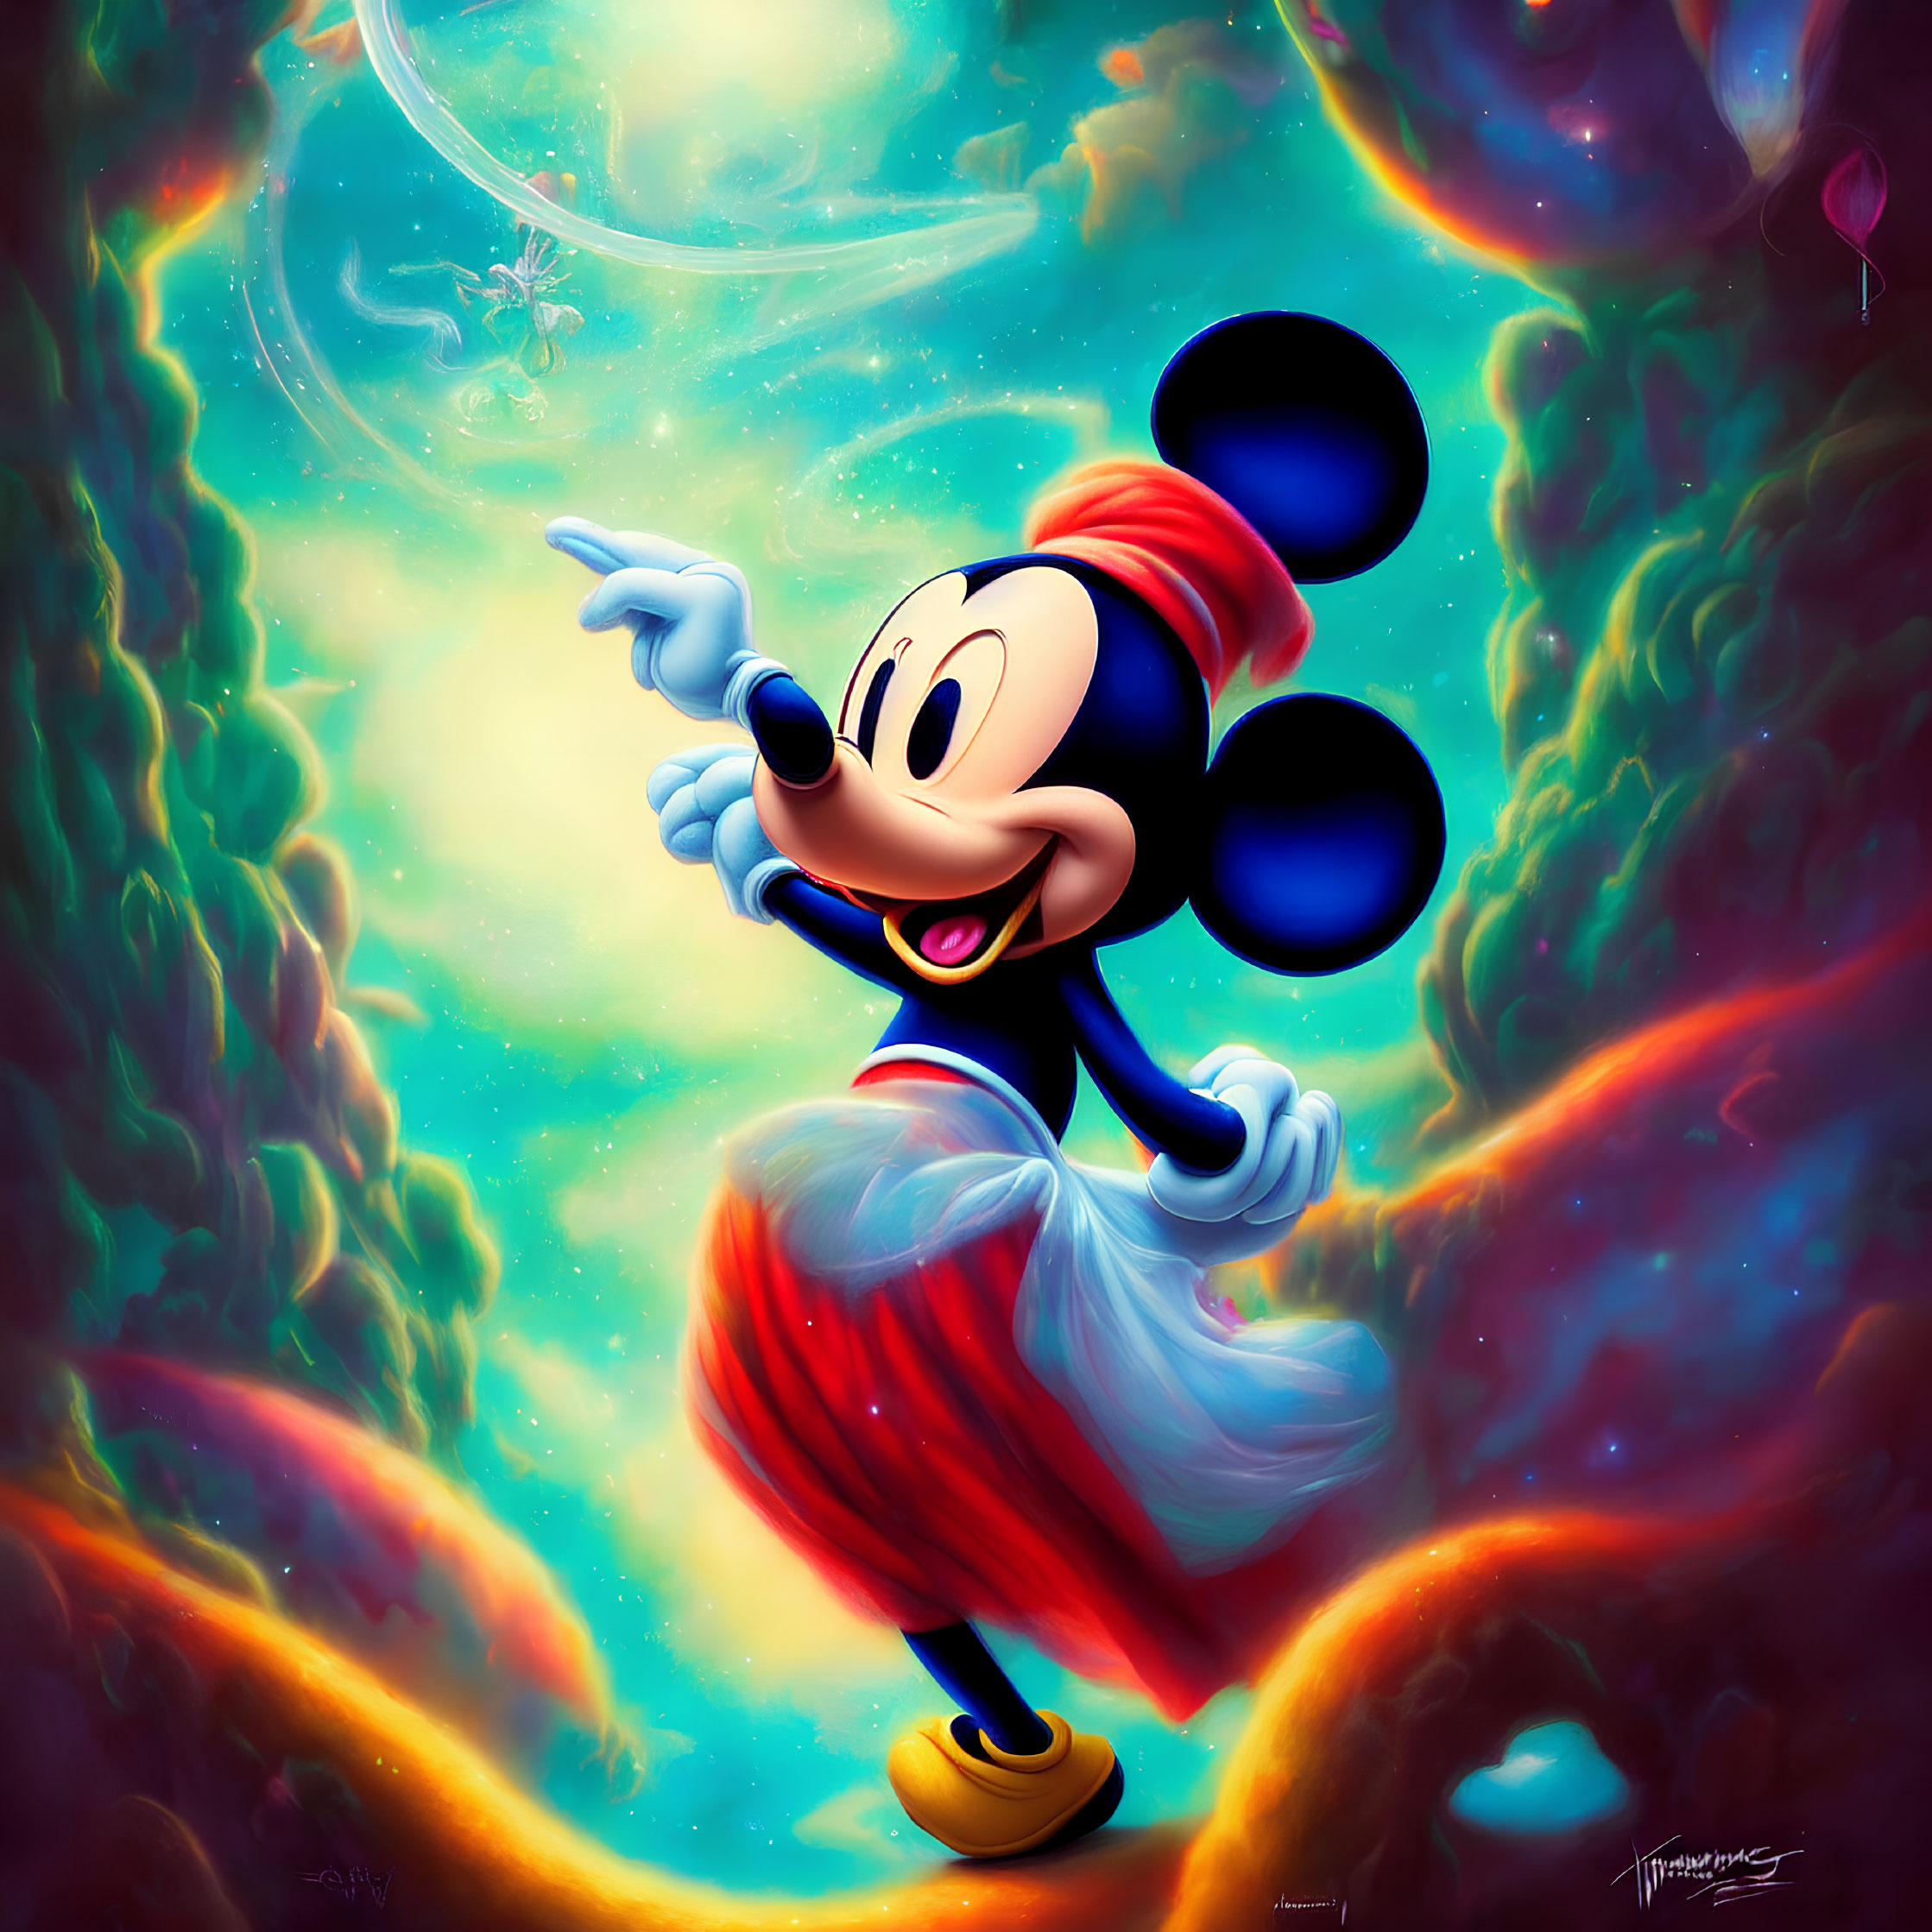 Colorful Mickey Mouse Illustration in Whimsical Pose with Abstract Background